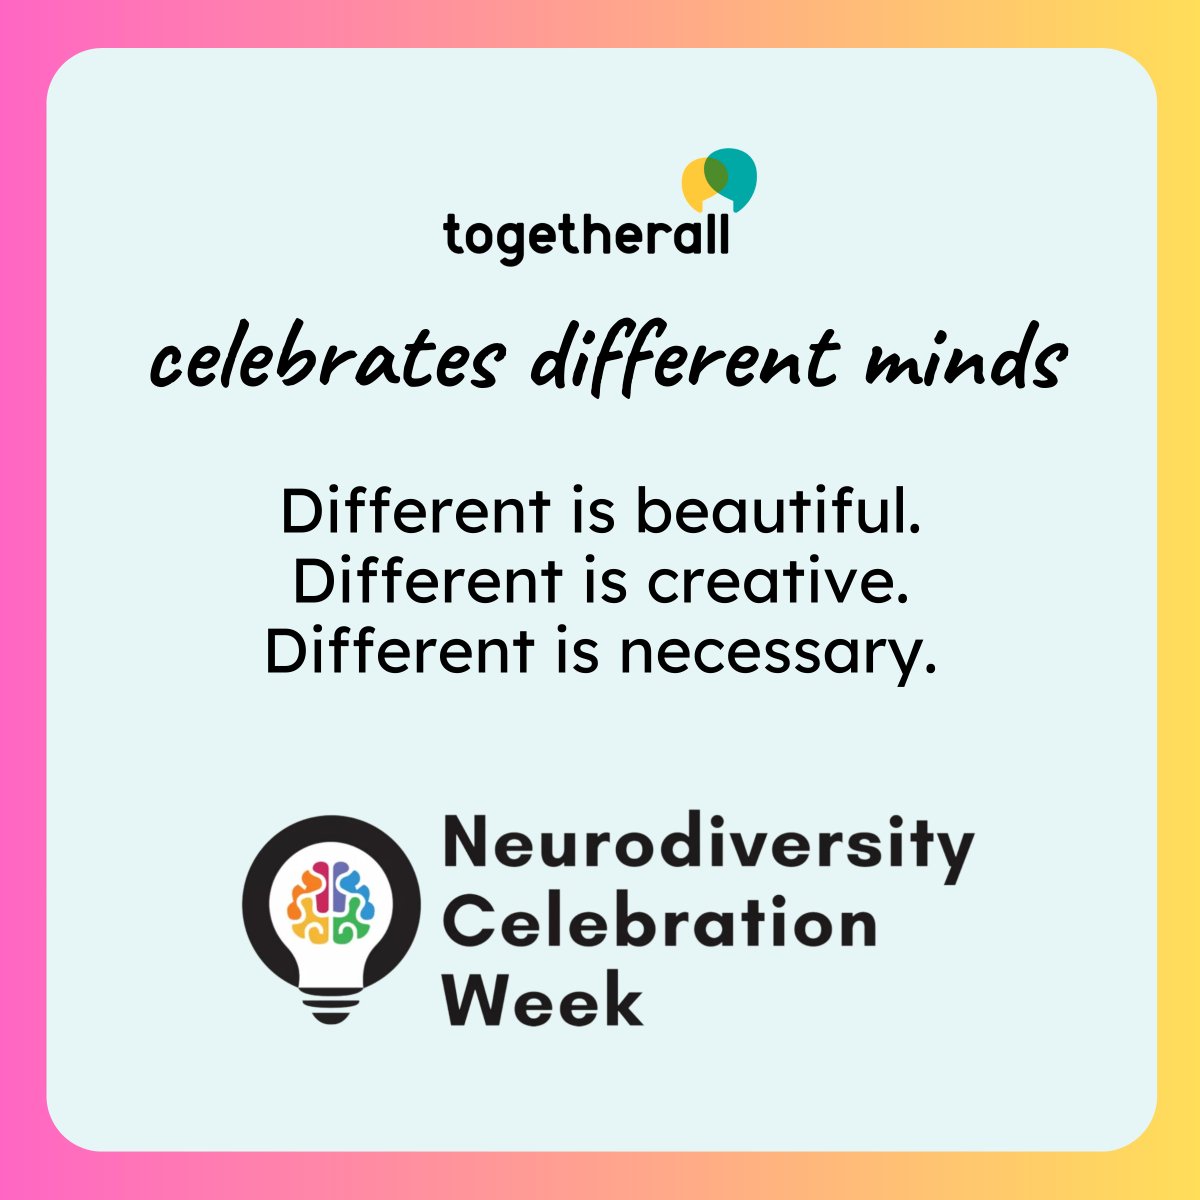 💡 We all experience and interact with the world in a way that makes sense to us. #Neurodiversity highlights the idea that there’s no one right way to think, learn, behave, or feel. 👉 Read our support article about neurodiversity: bit.ly/3L2vinn #embracedifference